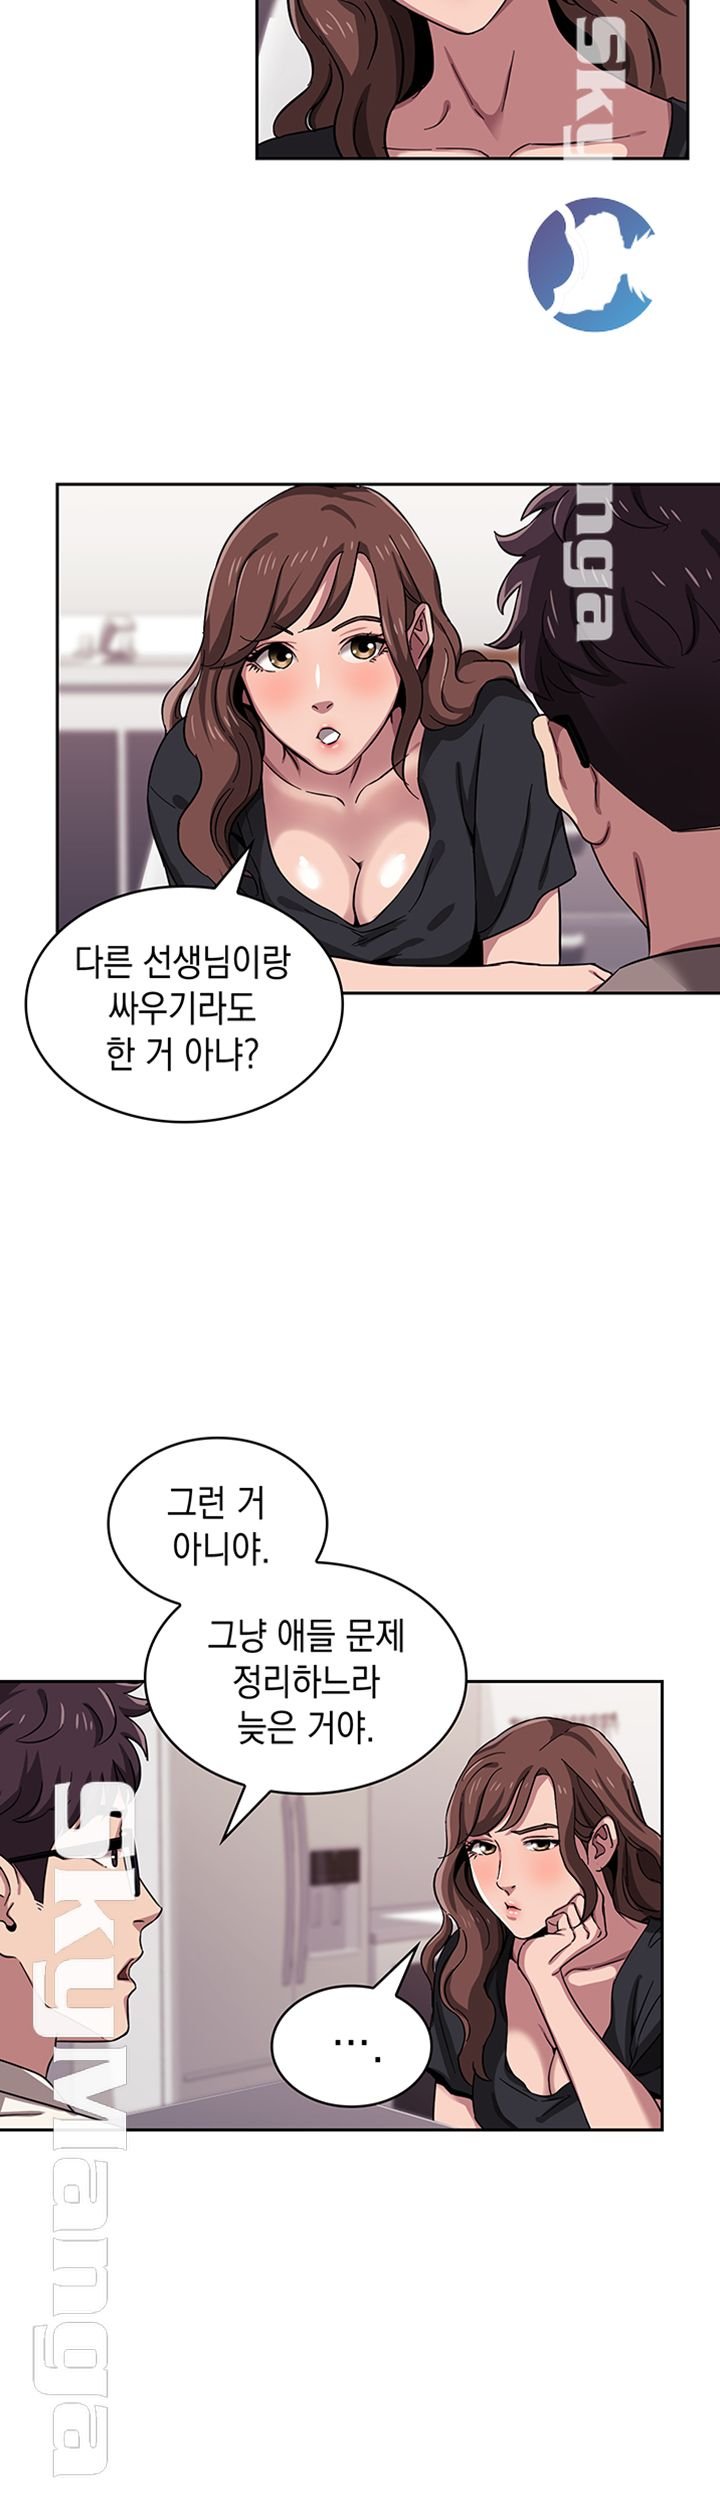 mother-hunting-raw-chap-3-21